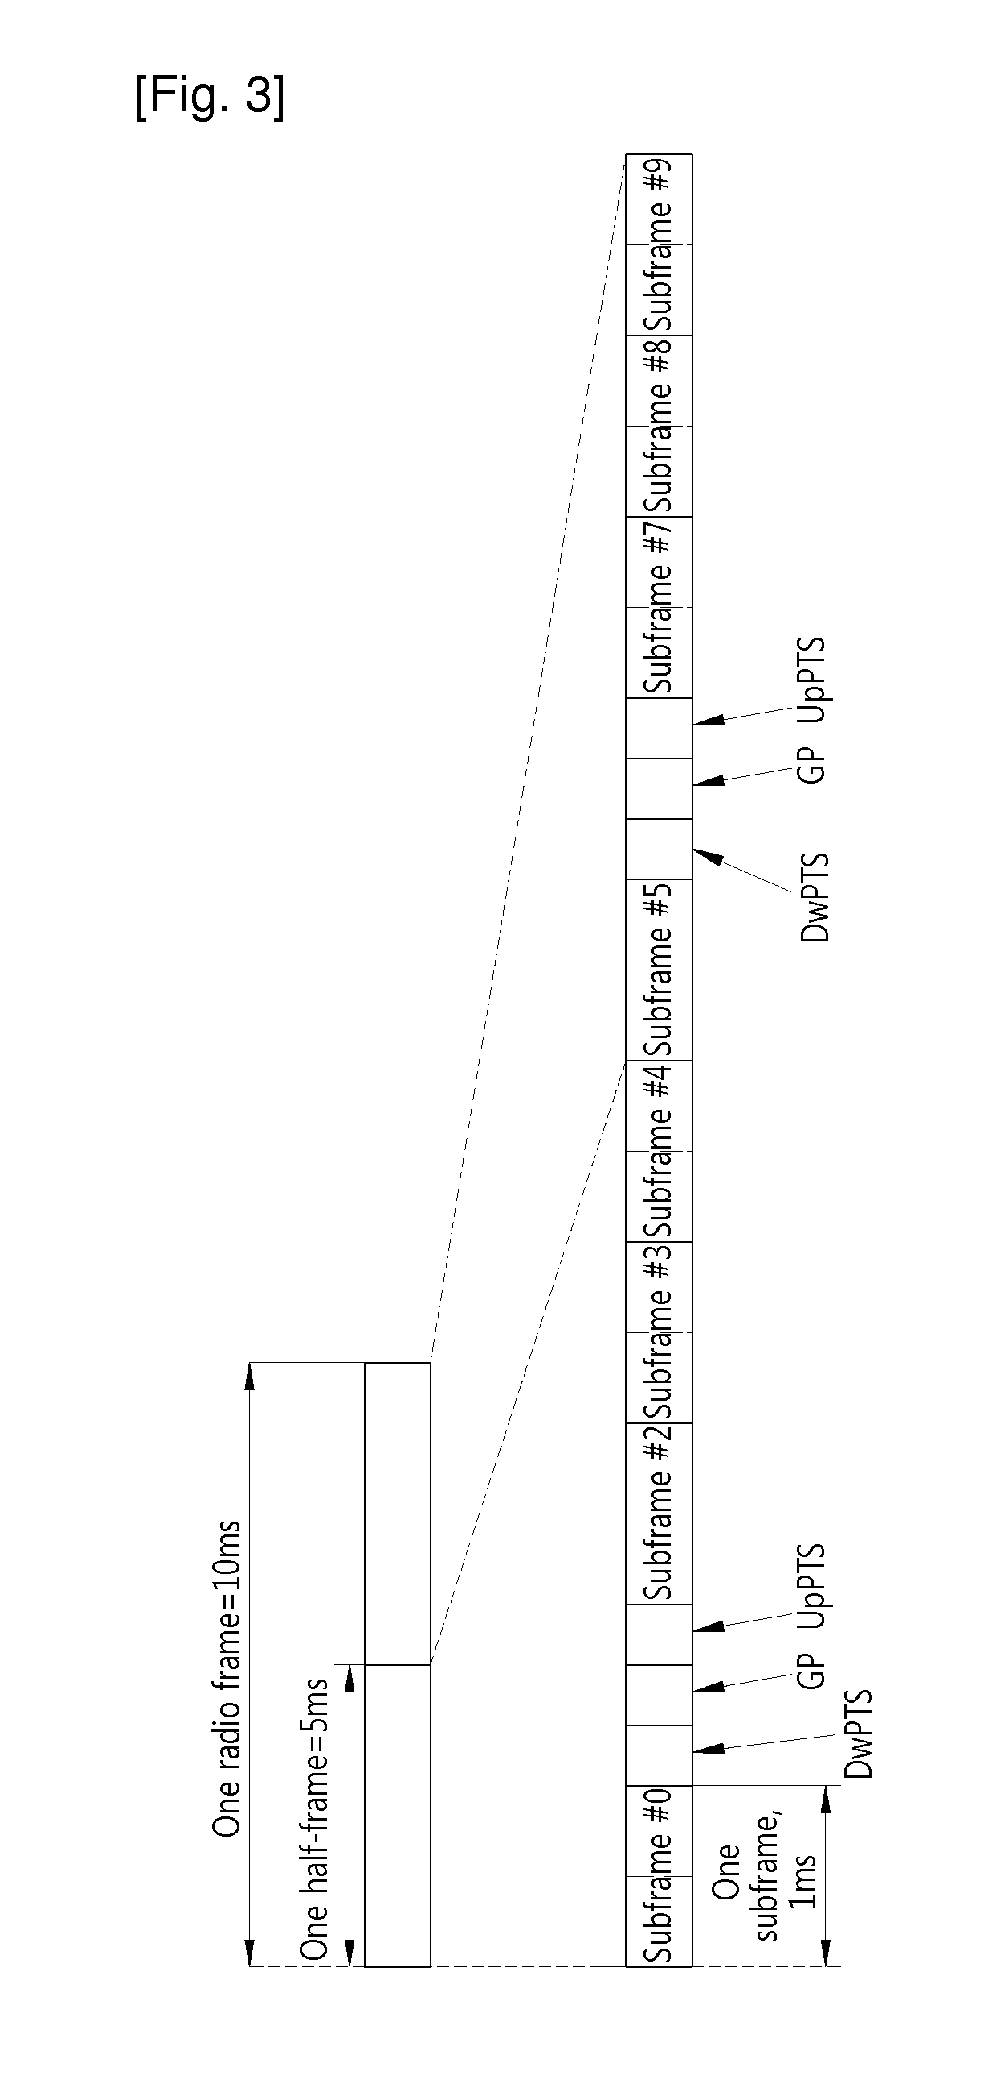 Method for relaying data in wireless communication system based on time division duplex